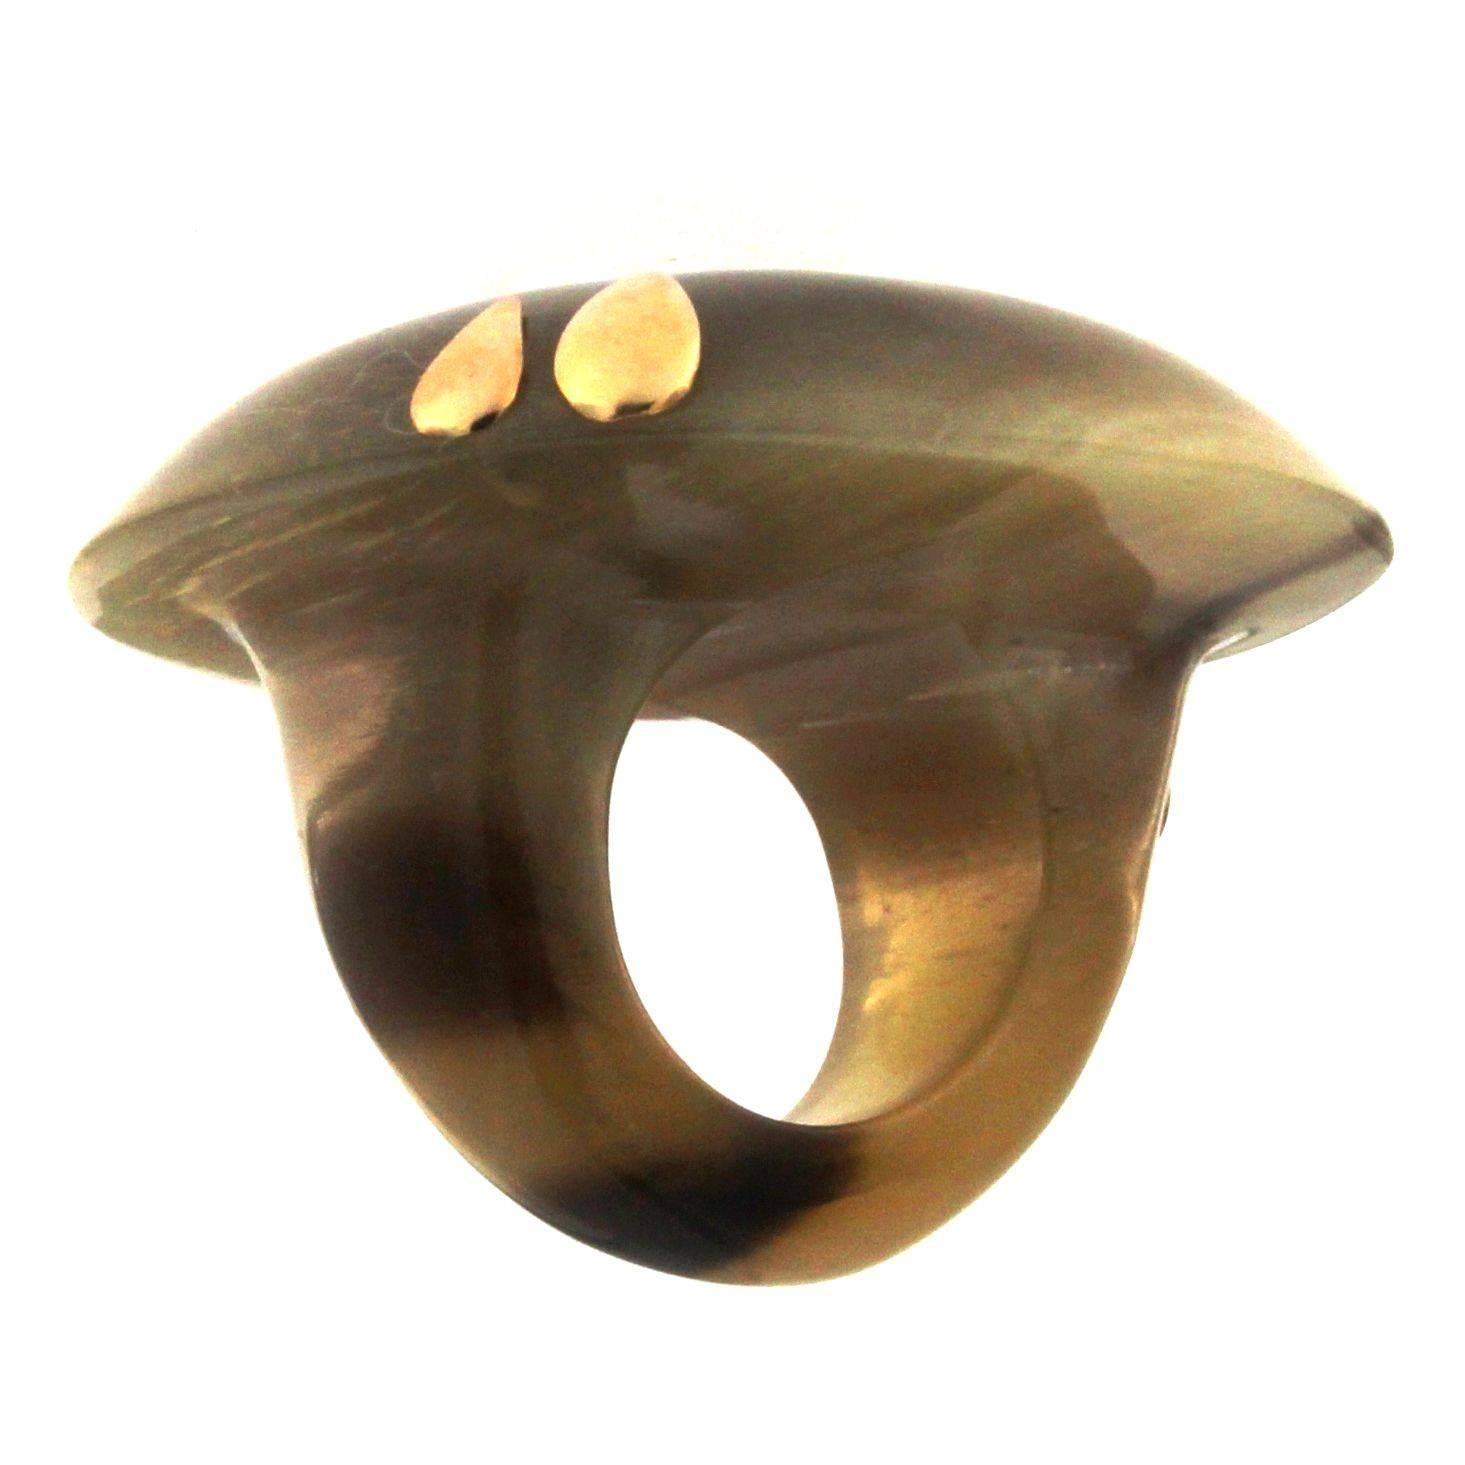 White Bufalo horn ring in 18 kt yellow gold mat

the total weight of the gold is 1.00

us size 6 3/4
STAMP: 10 MI ITALY 750

